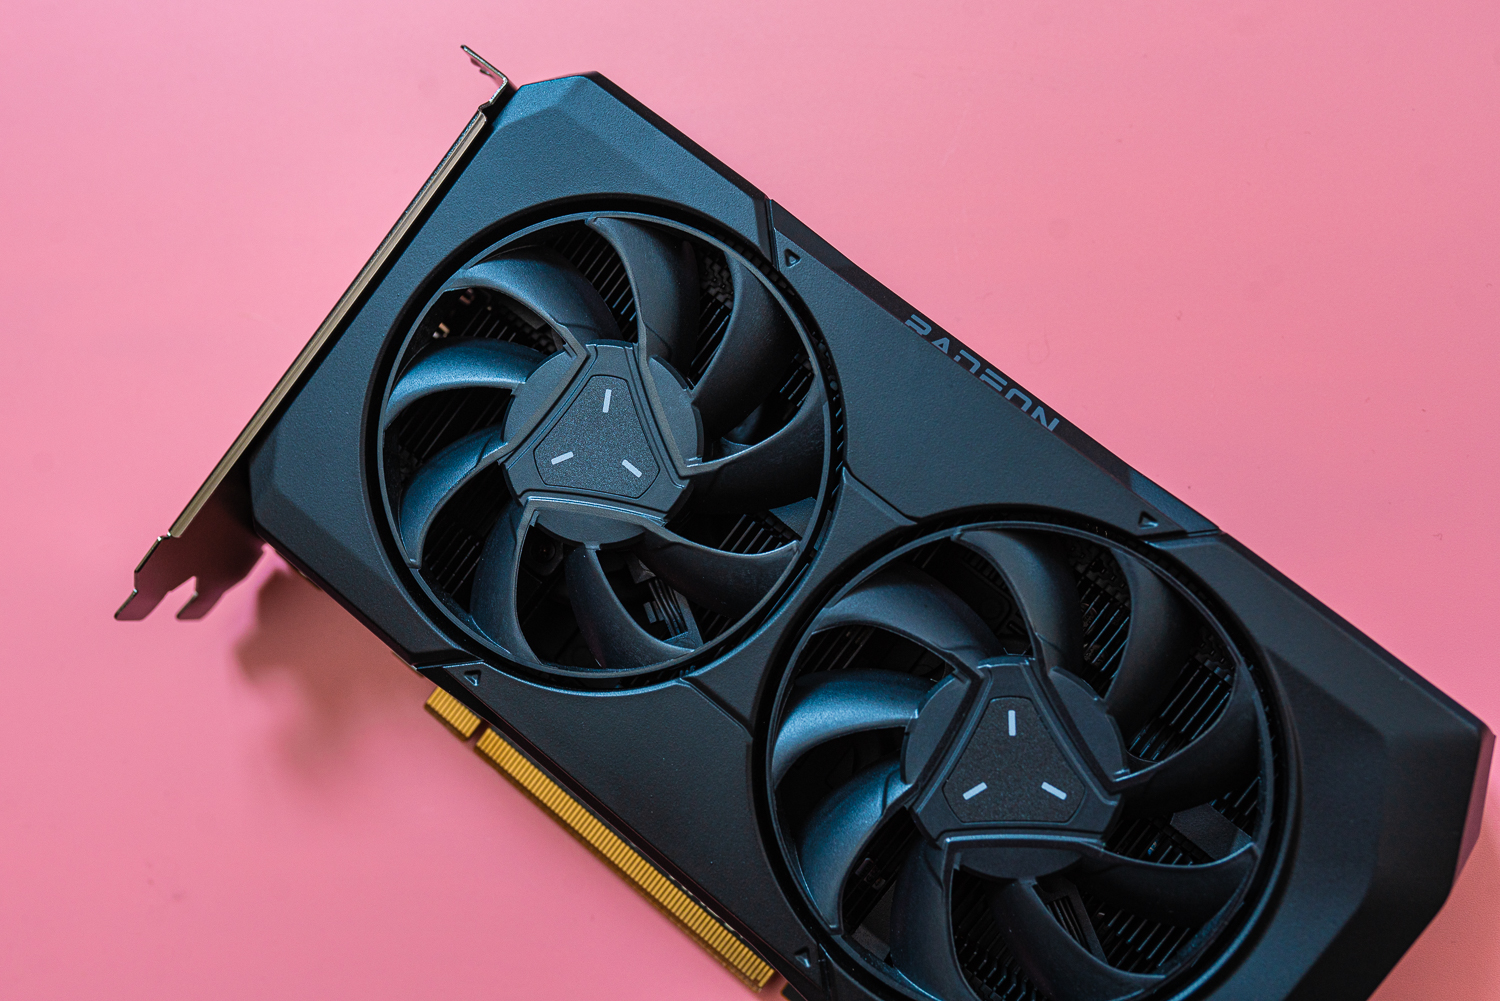 NVIDIA GeForce RTX 4060 Ti & RTX 4060 Rumored To Feature Over 2.5